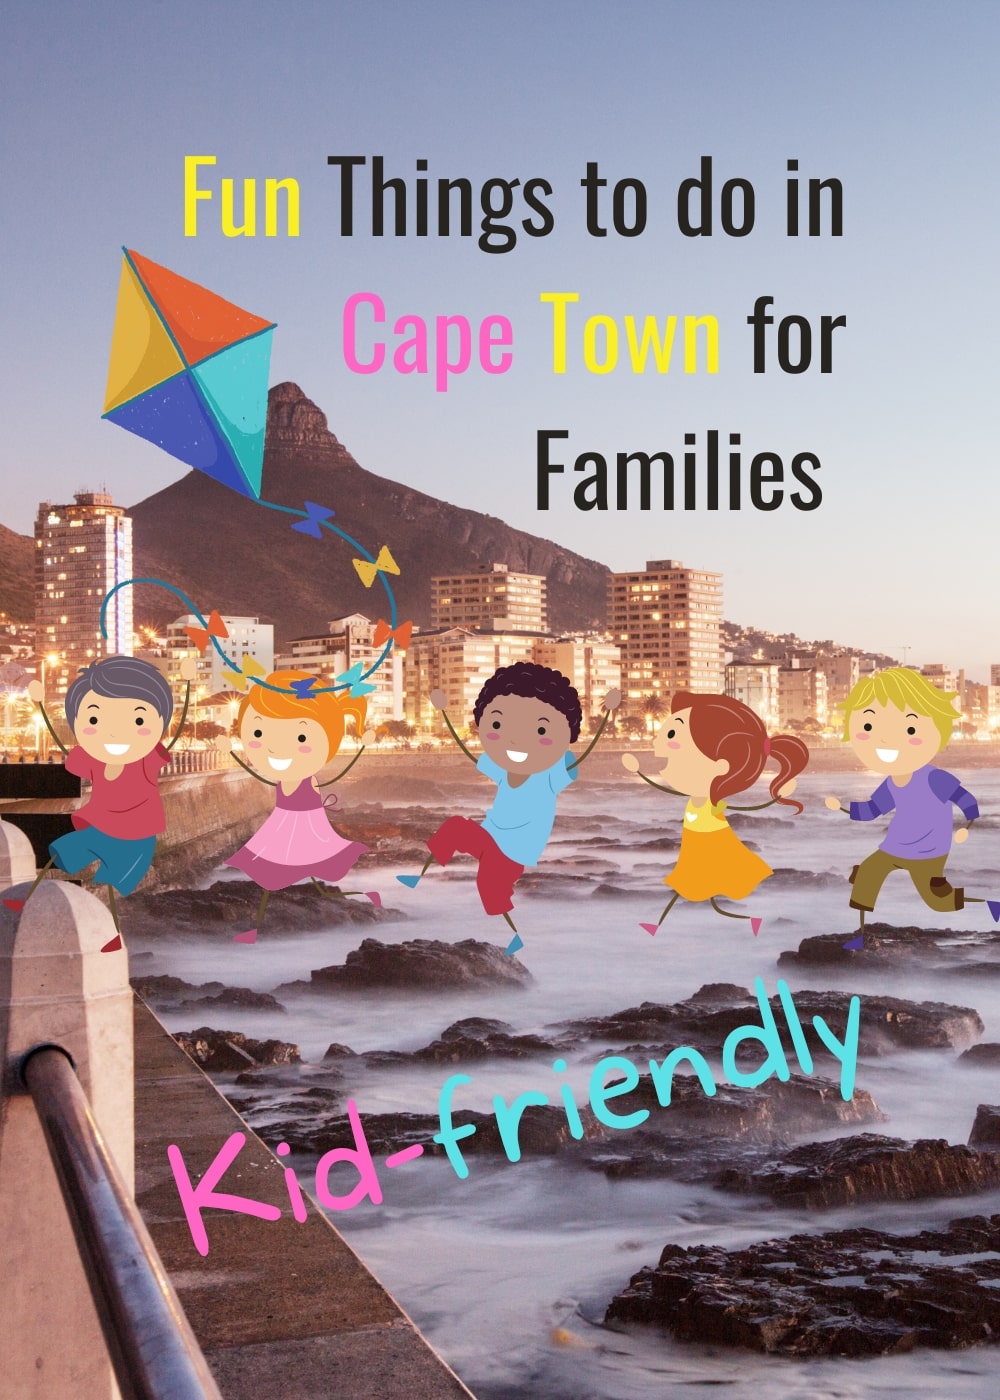 Fun things to do with kids in Cape Town Fun things to do in Cape Town for Families, Best Family Trip Destinations